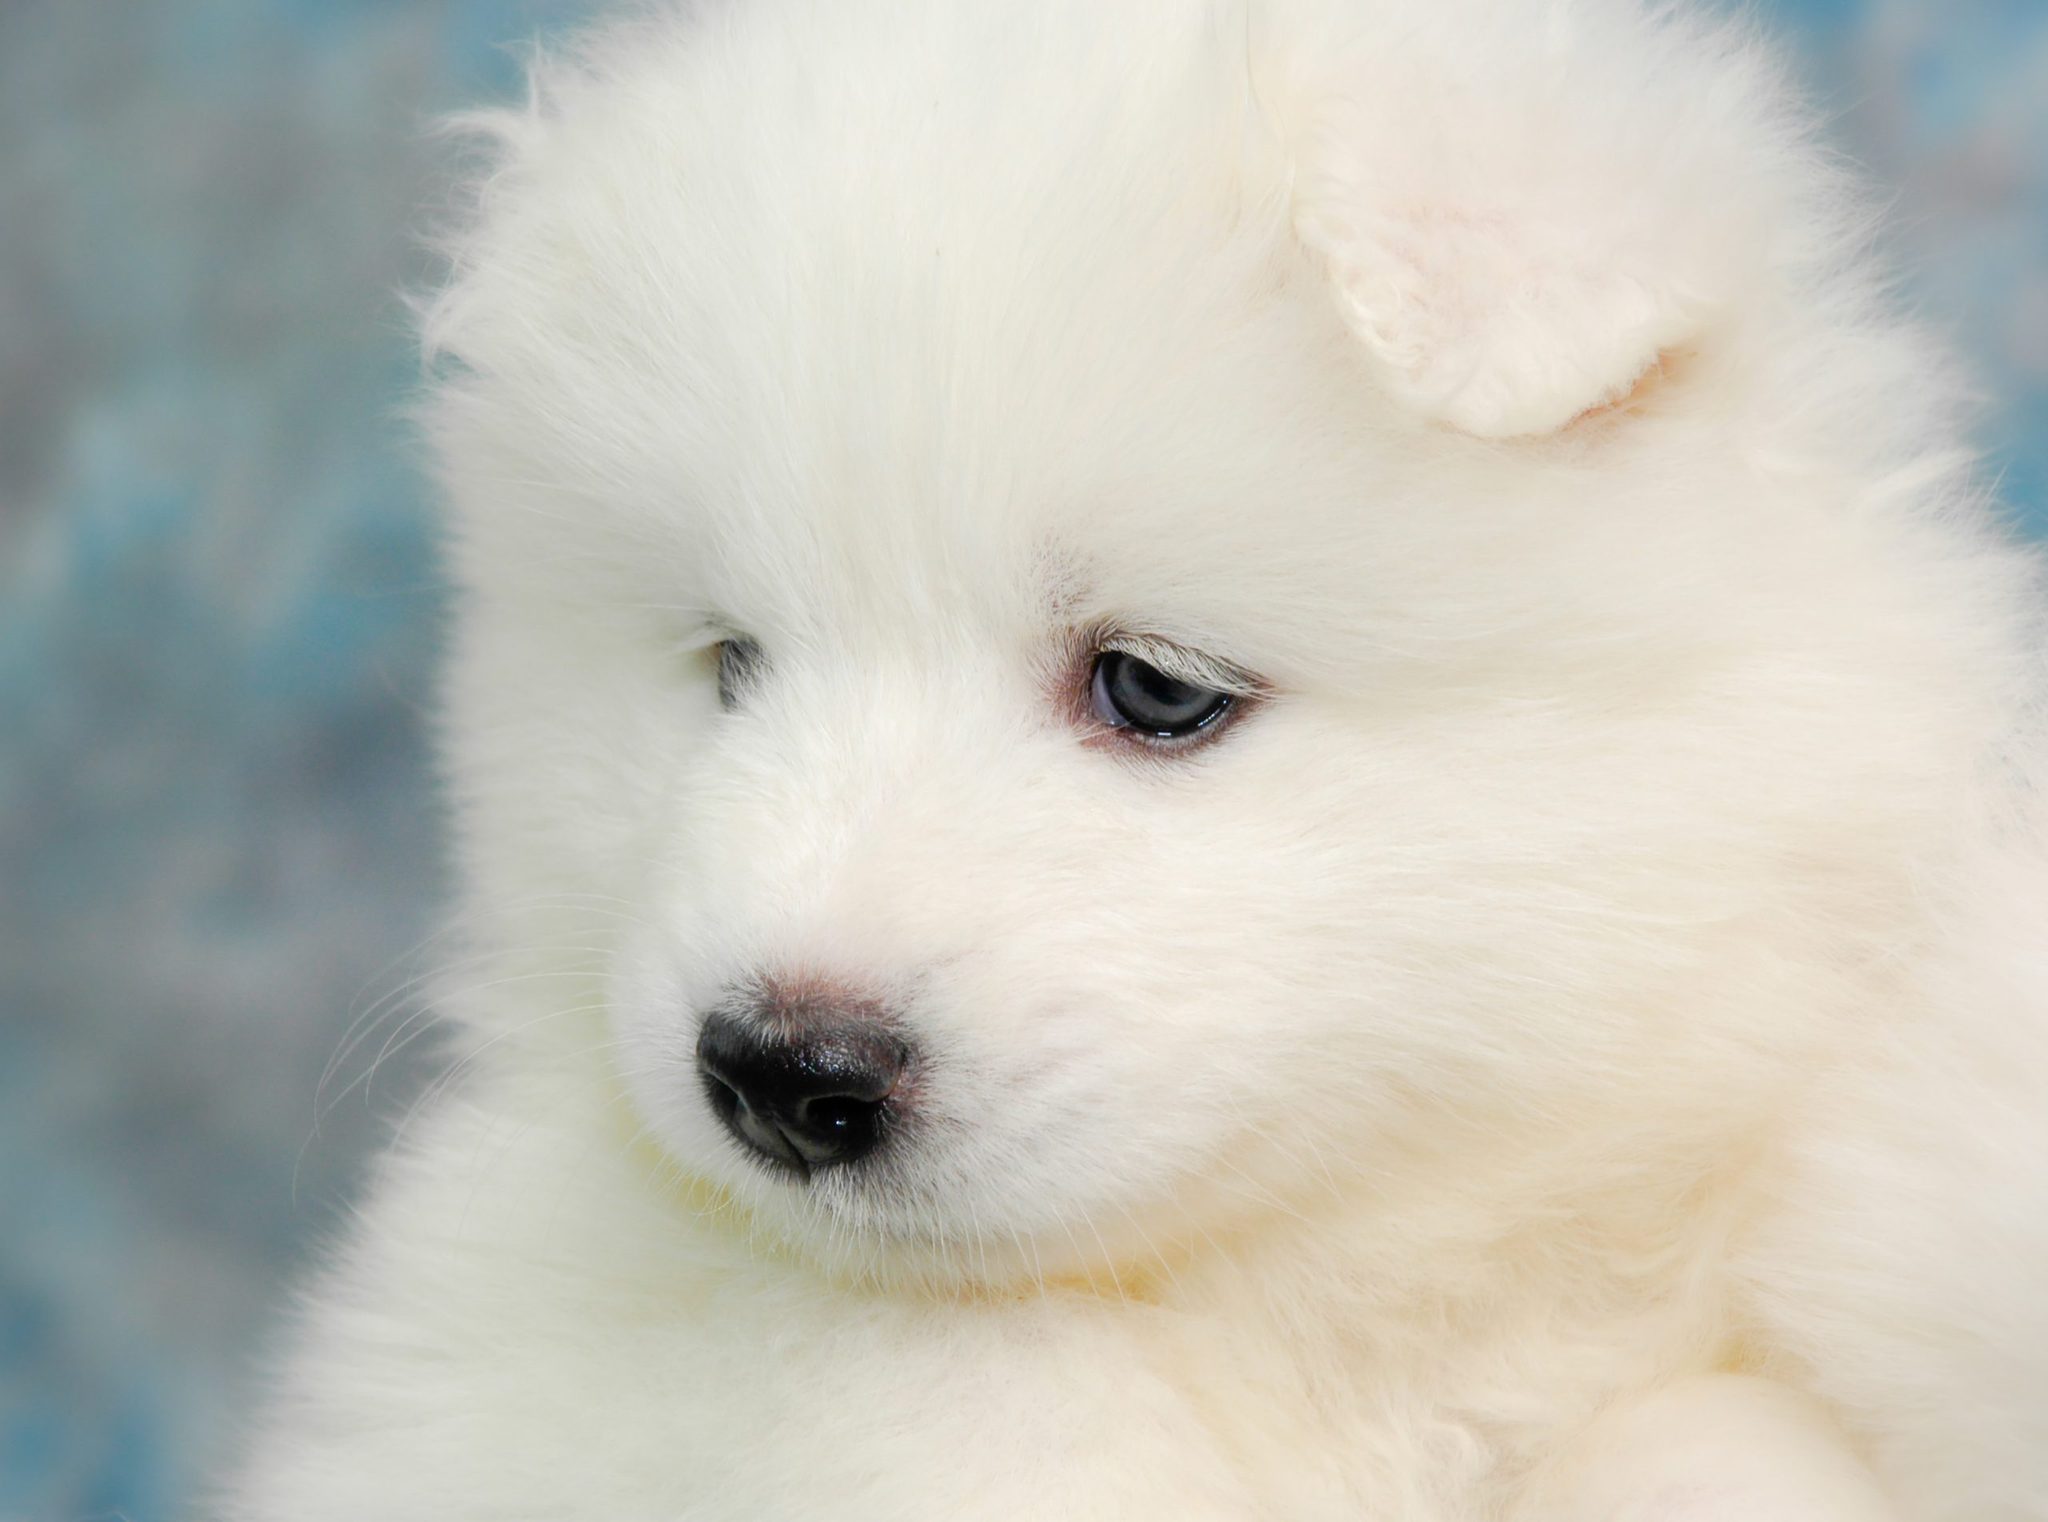 If You Want to Know the Number of 👶🏻 Kids You’ll Have, Choose Some 🐶 Dogs to Find Out Samoyed